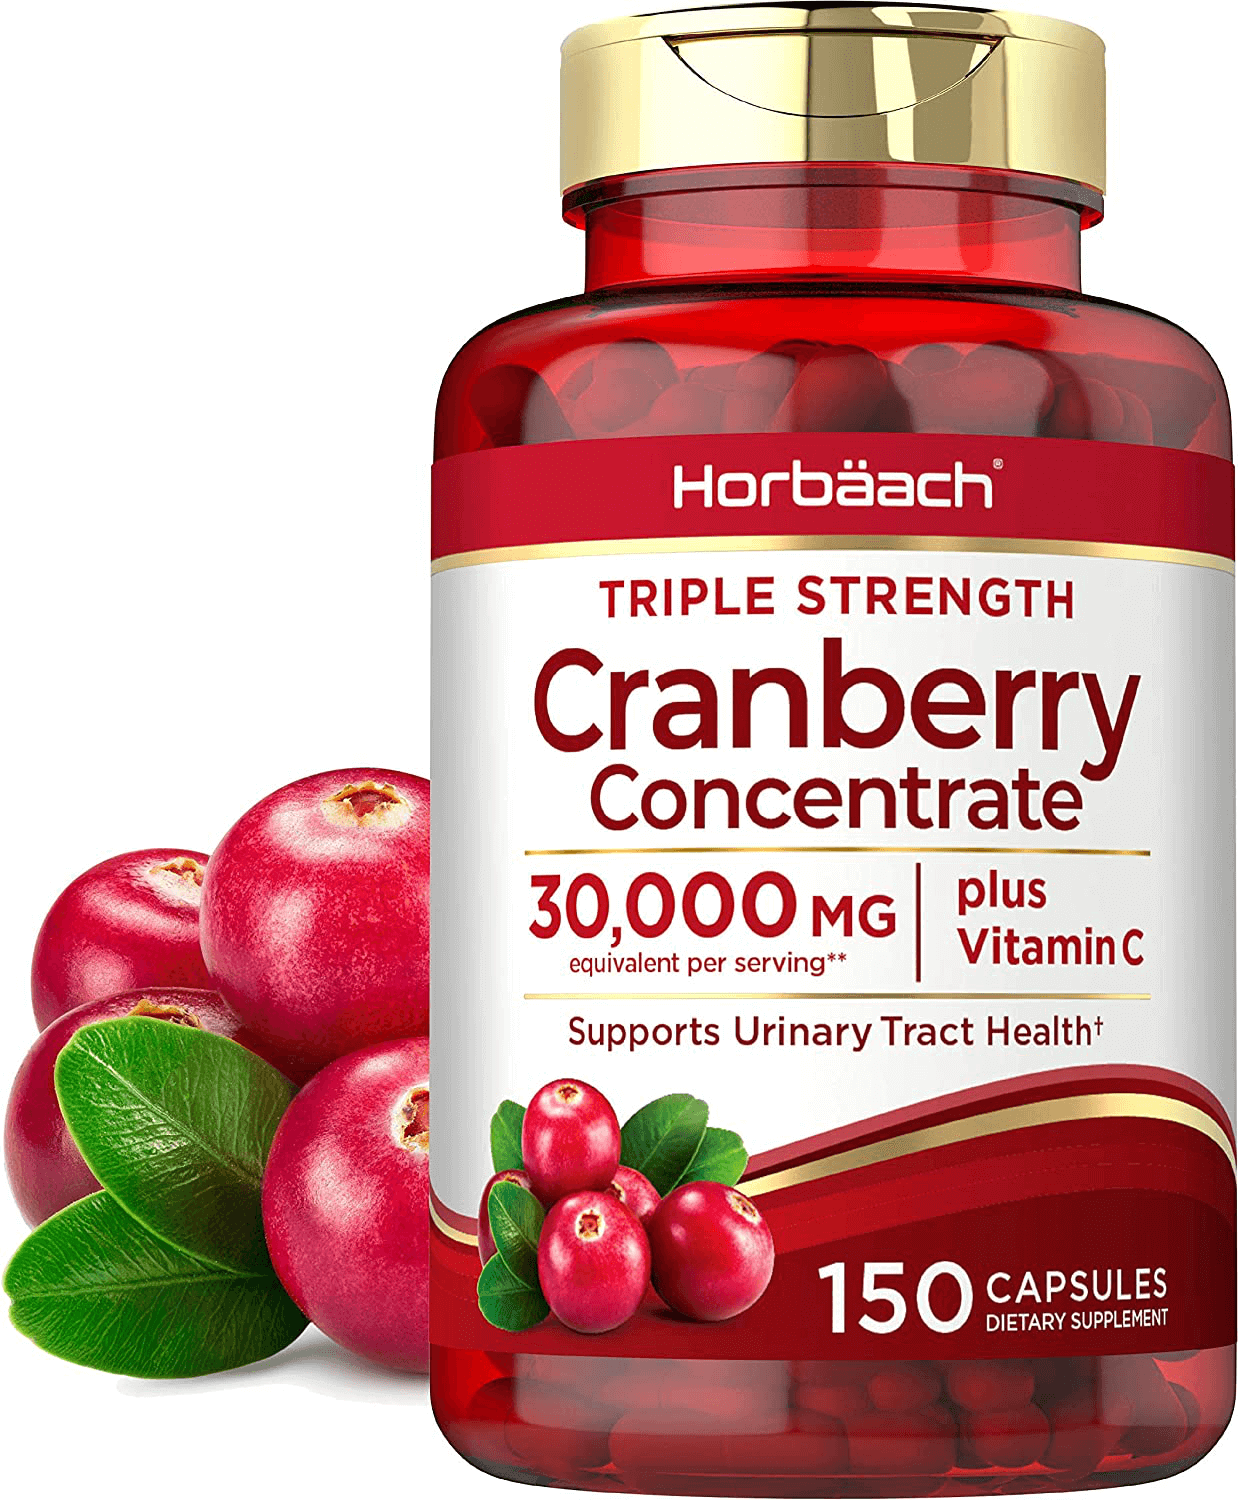 Horbaach Cranberry (30,000 mg) + Vitamin C 150 Capsules | Triple Strength Ultimate Potency | Non-GMO, Gluten Free Cranberry Pills Supplement from Concentrate Extract - vitamenstore.com